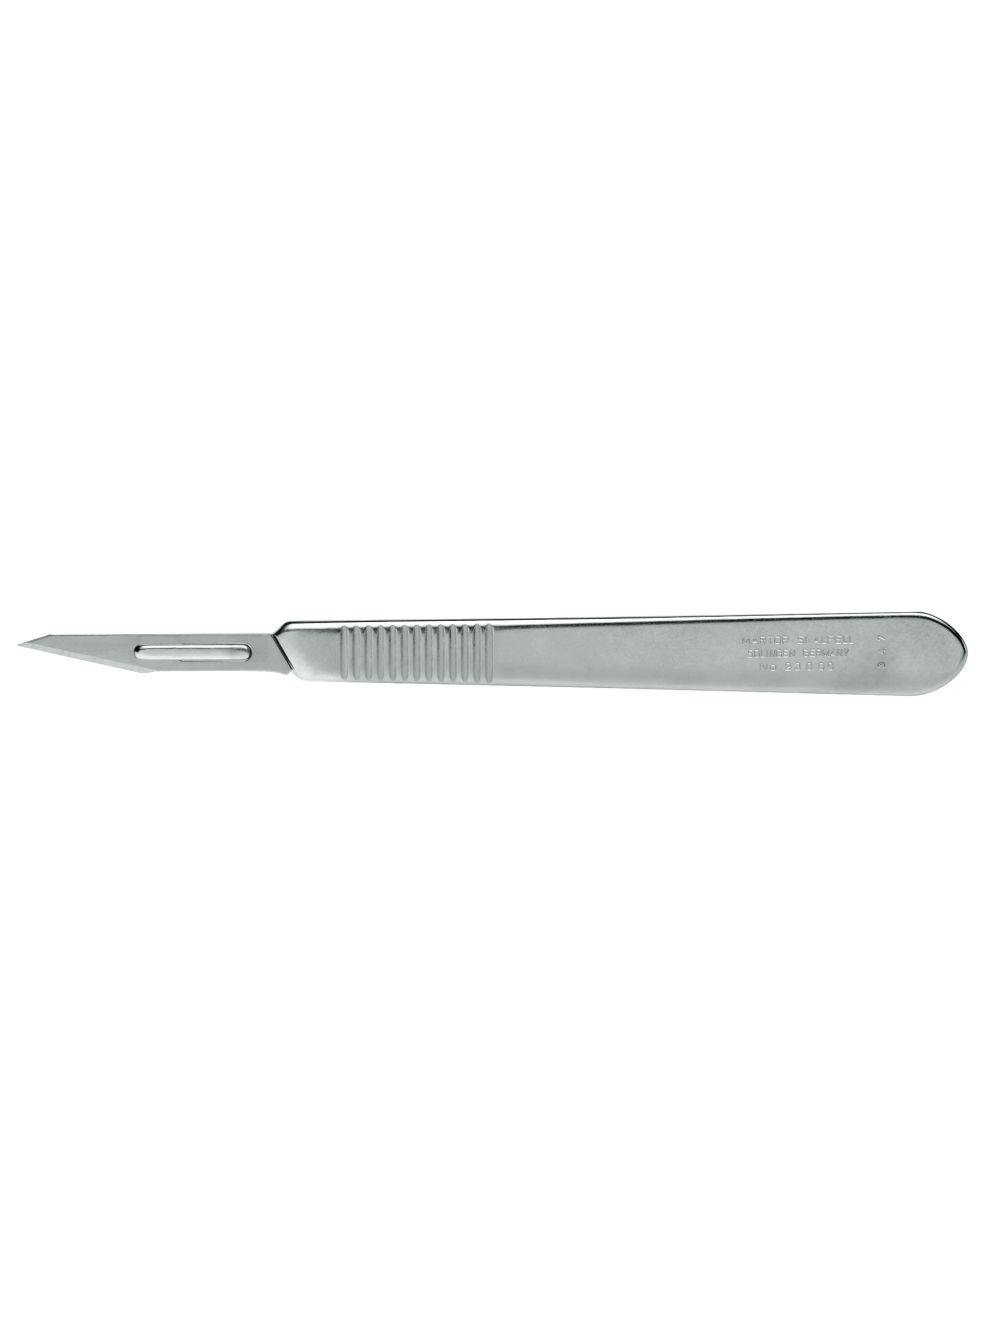 Martor Grafix Scalpell Small With Blade No.11, Knife With Metal Handle (Single Unit)